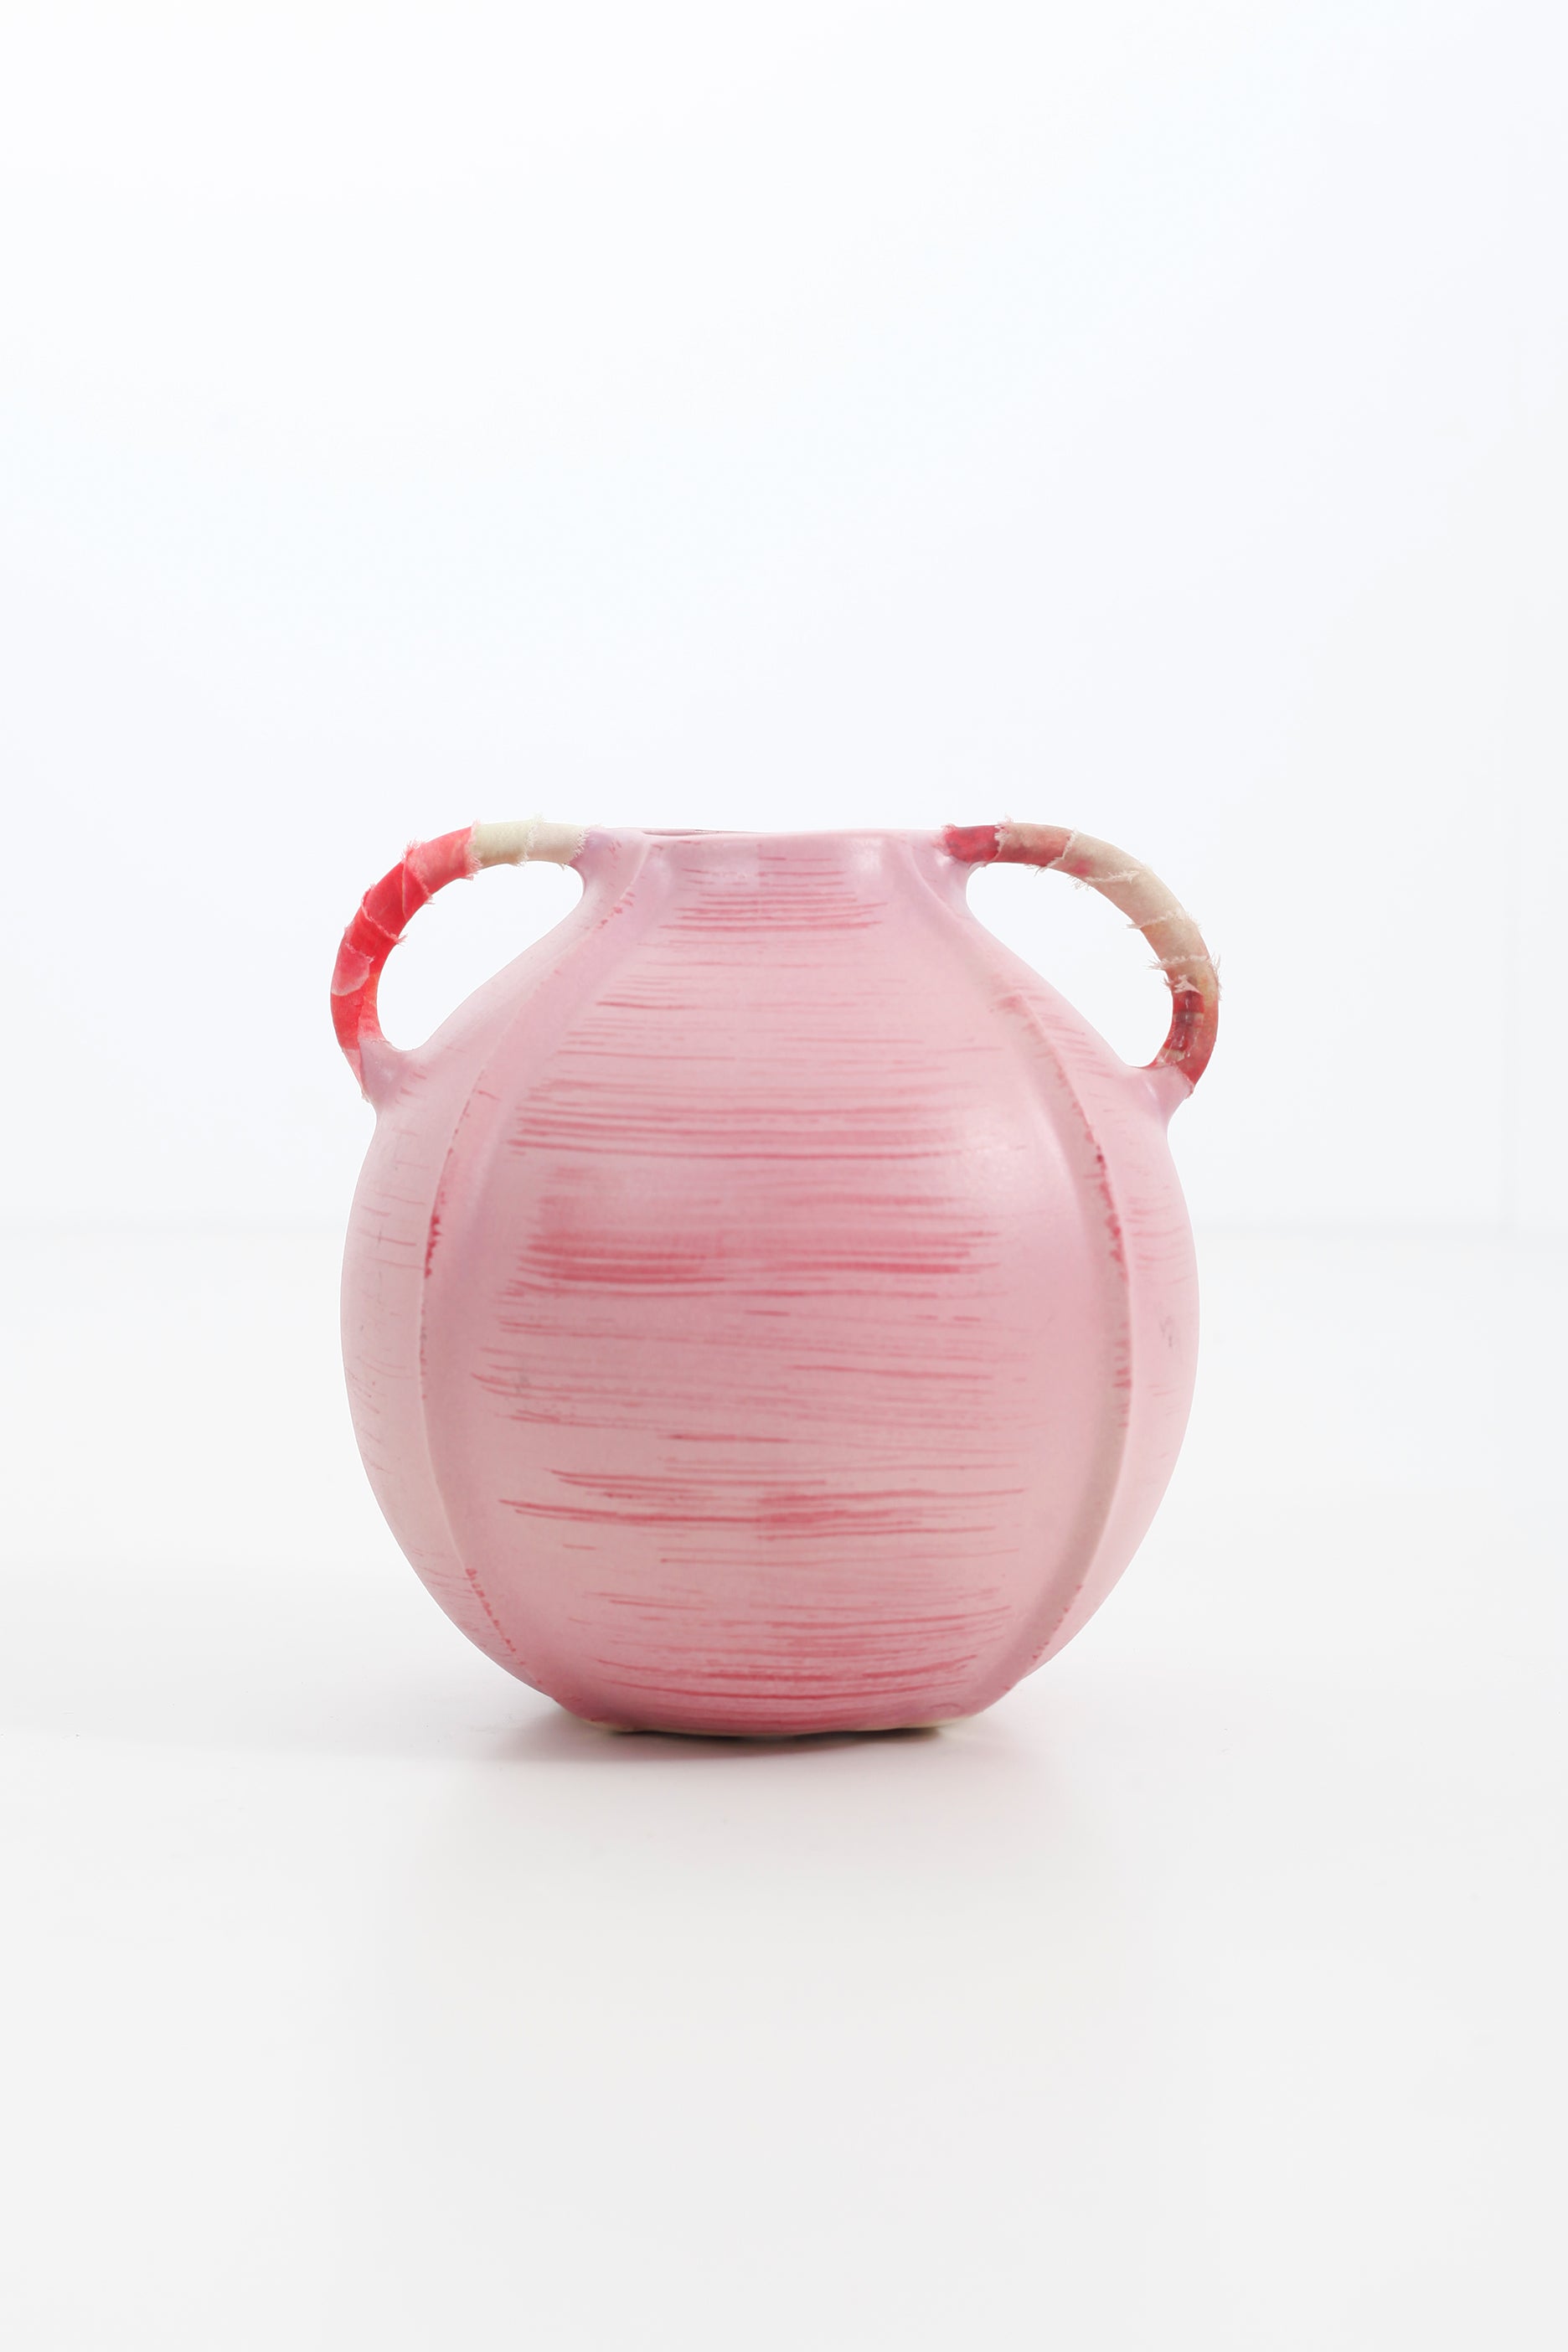 Small Pink Round Ceramic Vase with Handles